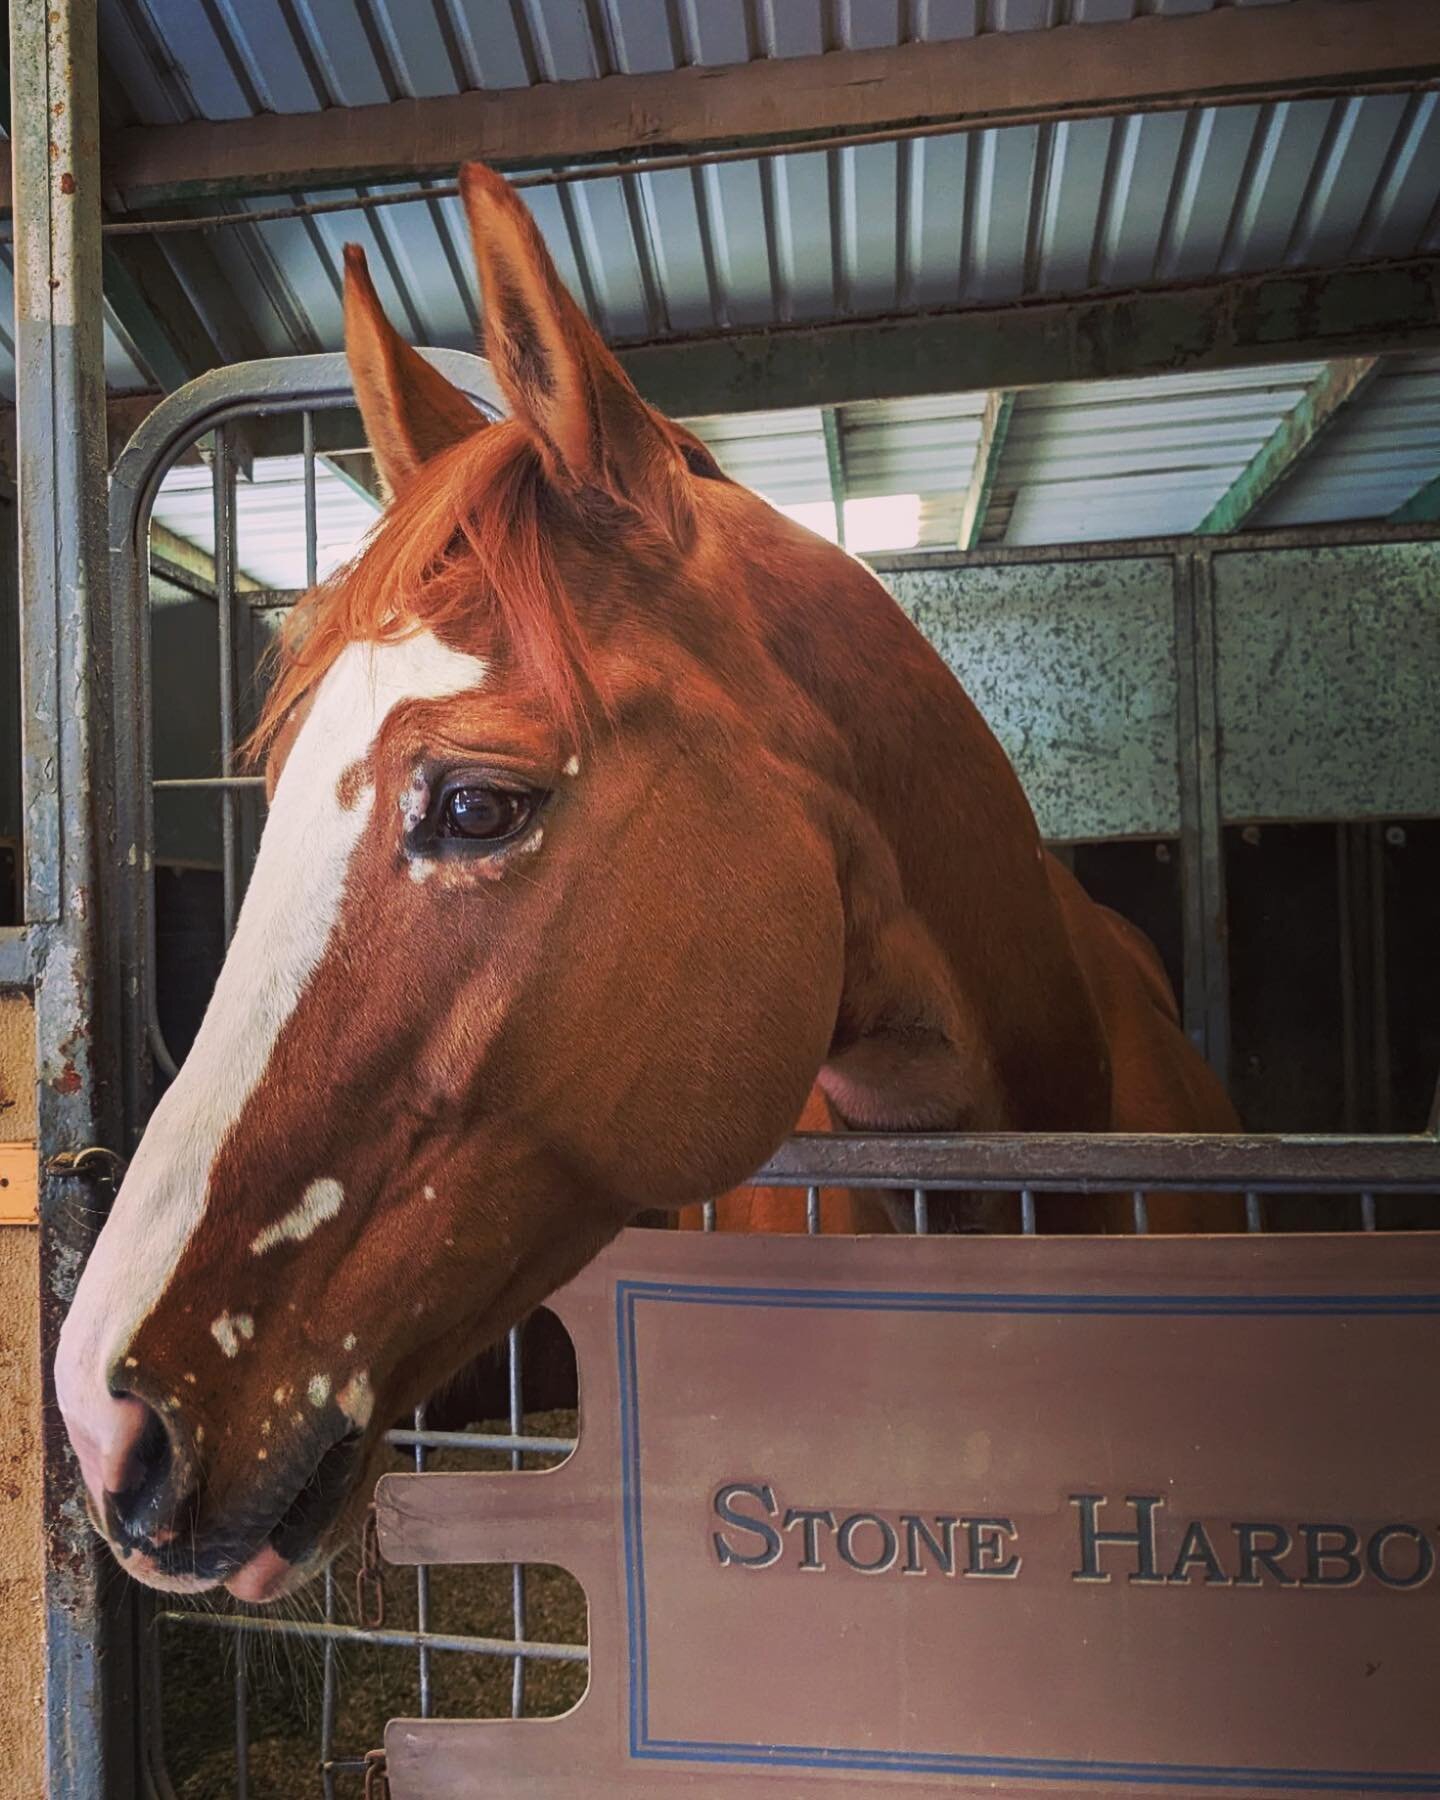 Welcome back gorgeous 🥰
One more mare in the team!

#stoneharborequestrian #maresforthewin #beautyandsassy